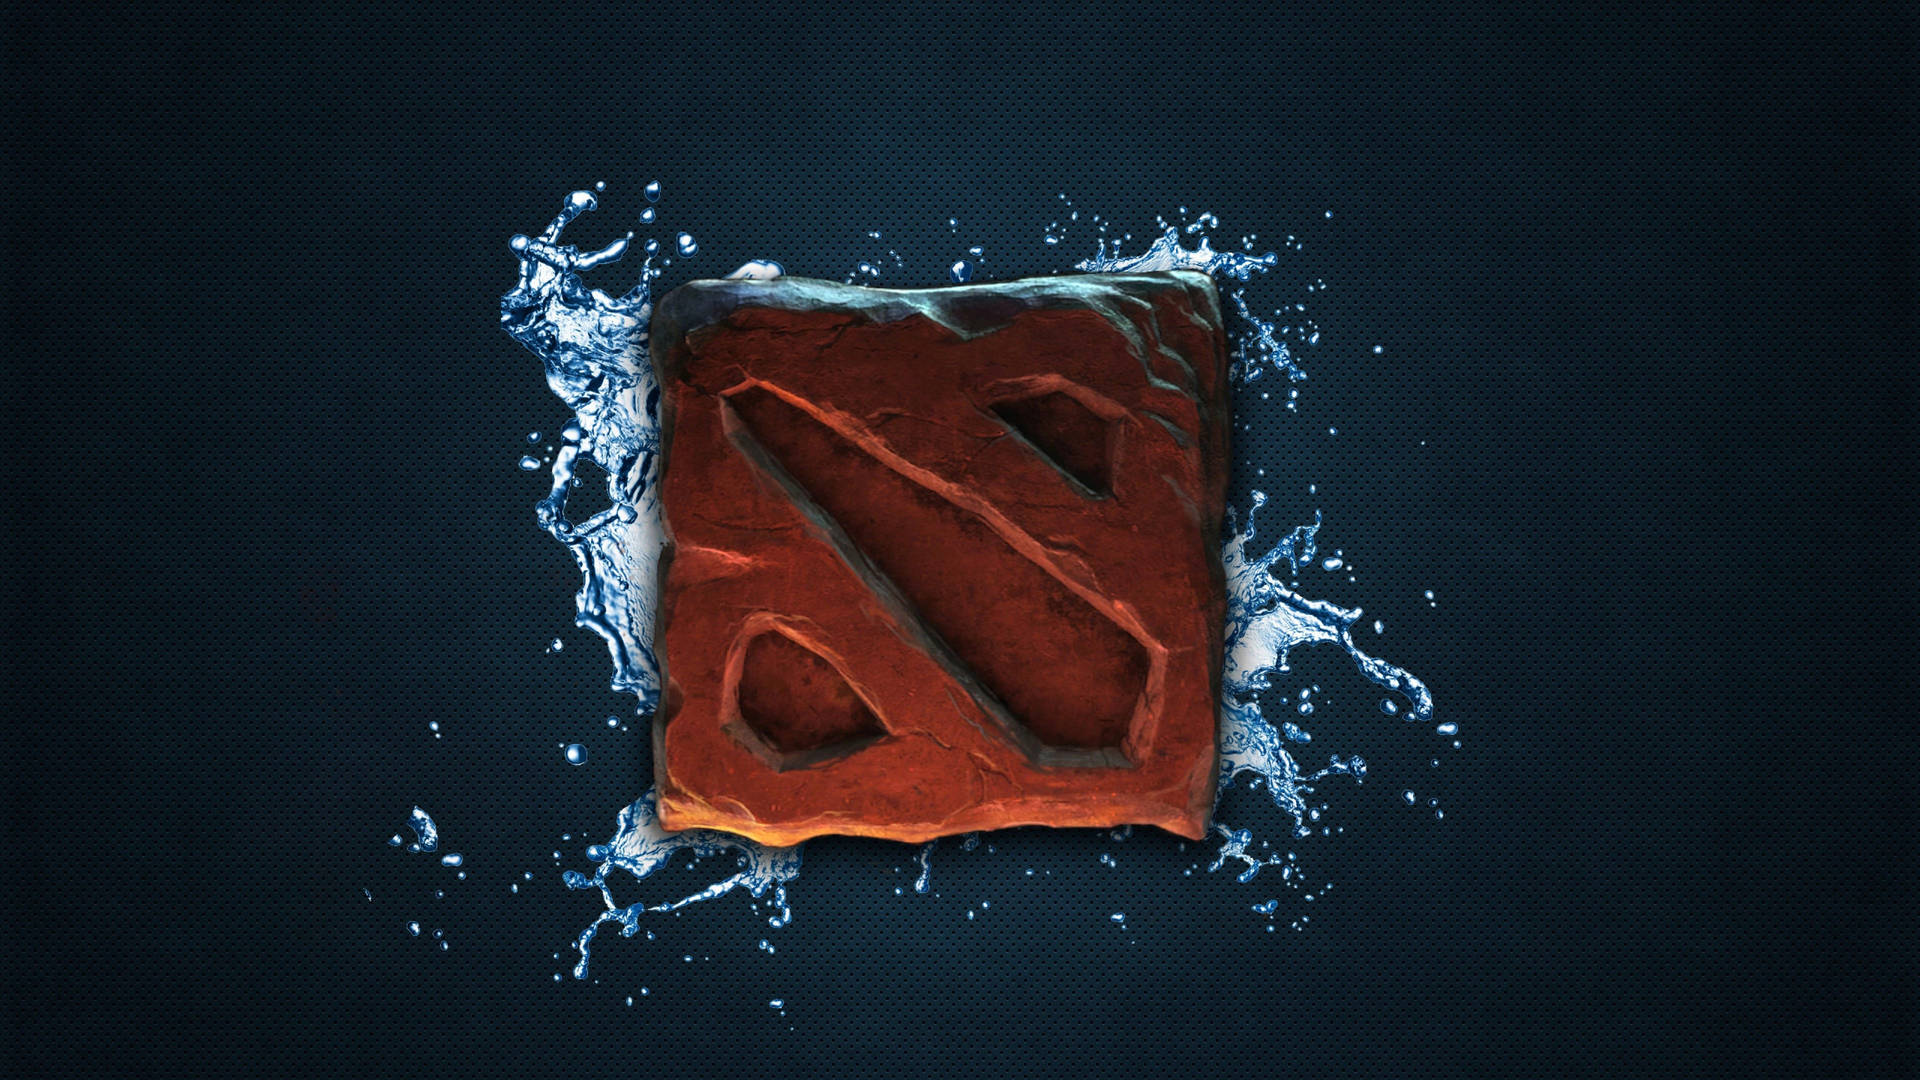 Dota 2 3840X2160 Wallpaper and Background Image